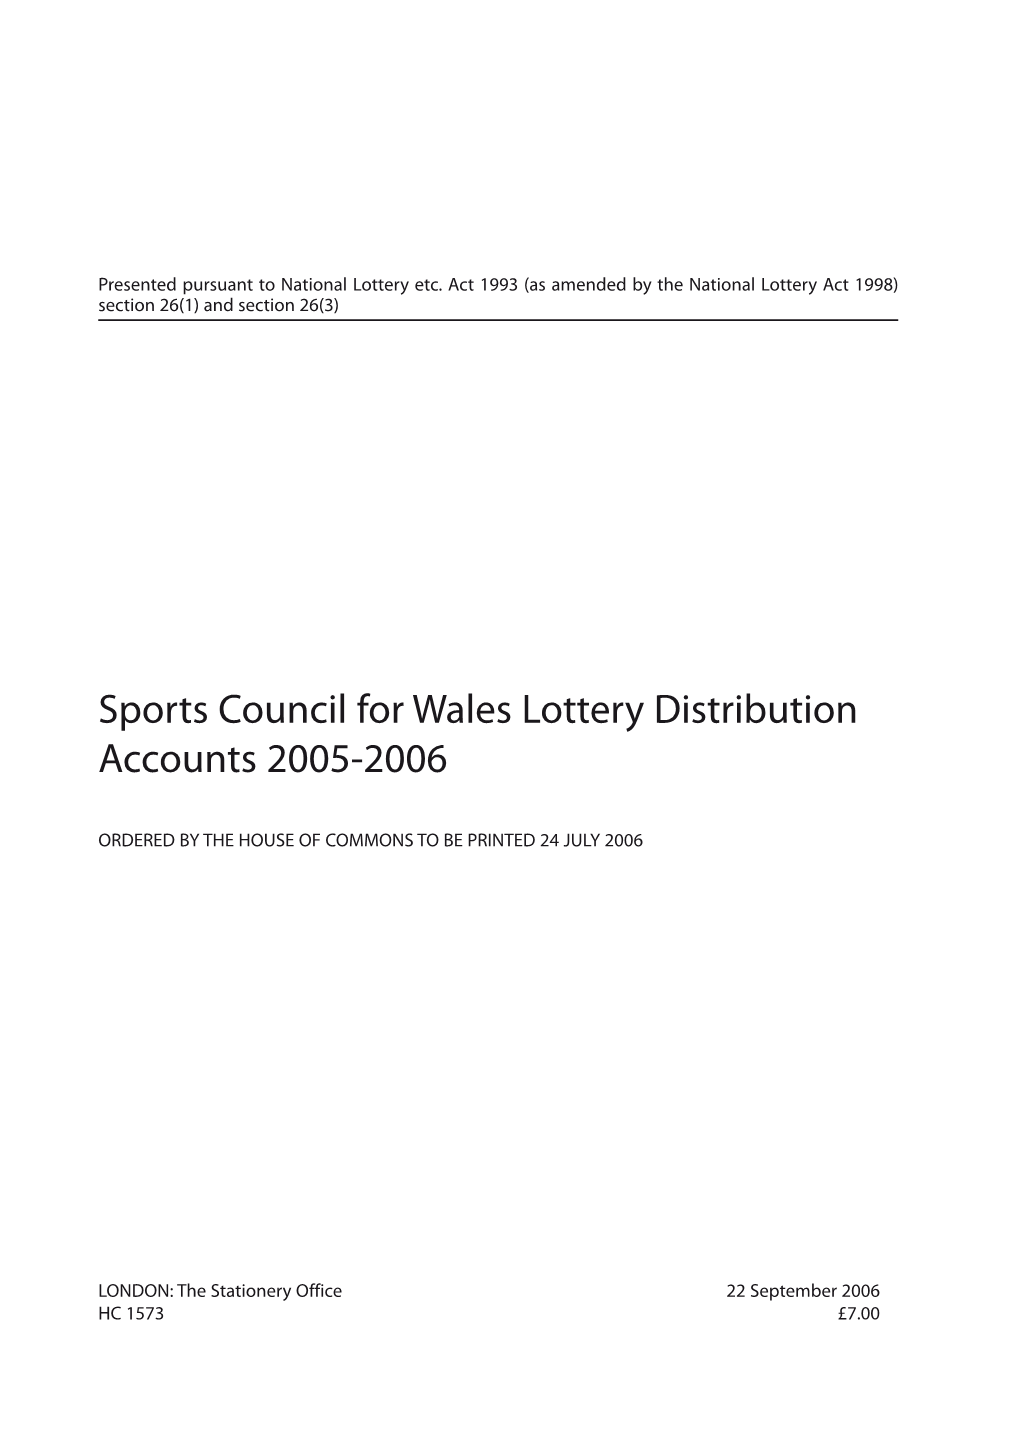 Sports Council for Wales Lottery Distribution Accounts 2005-2006